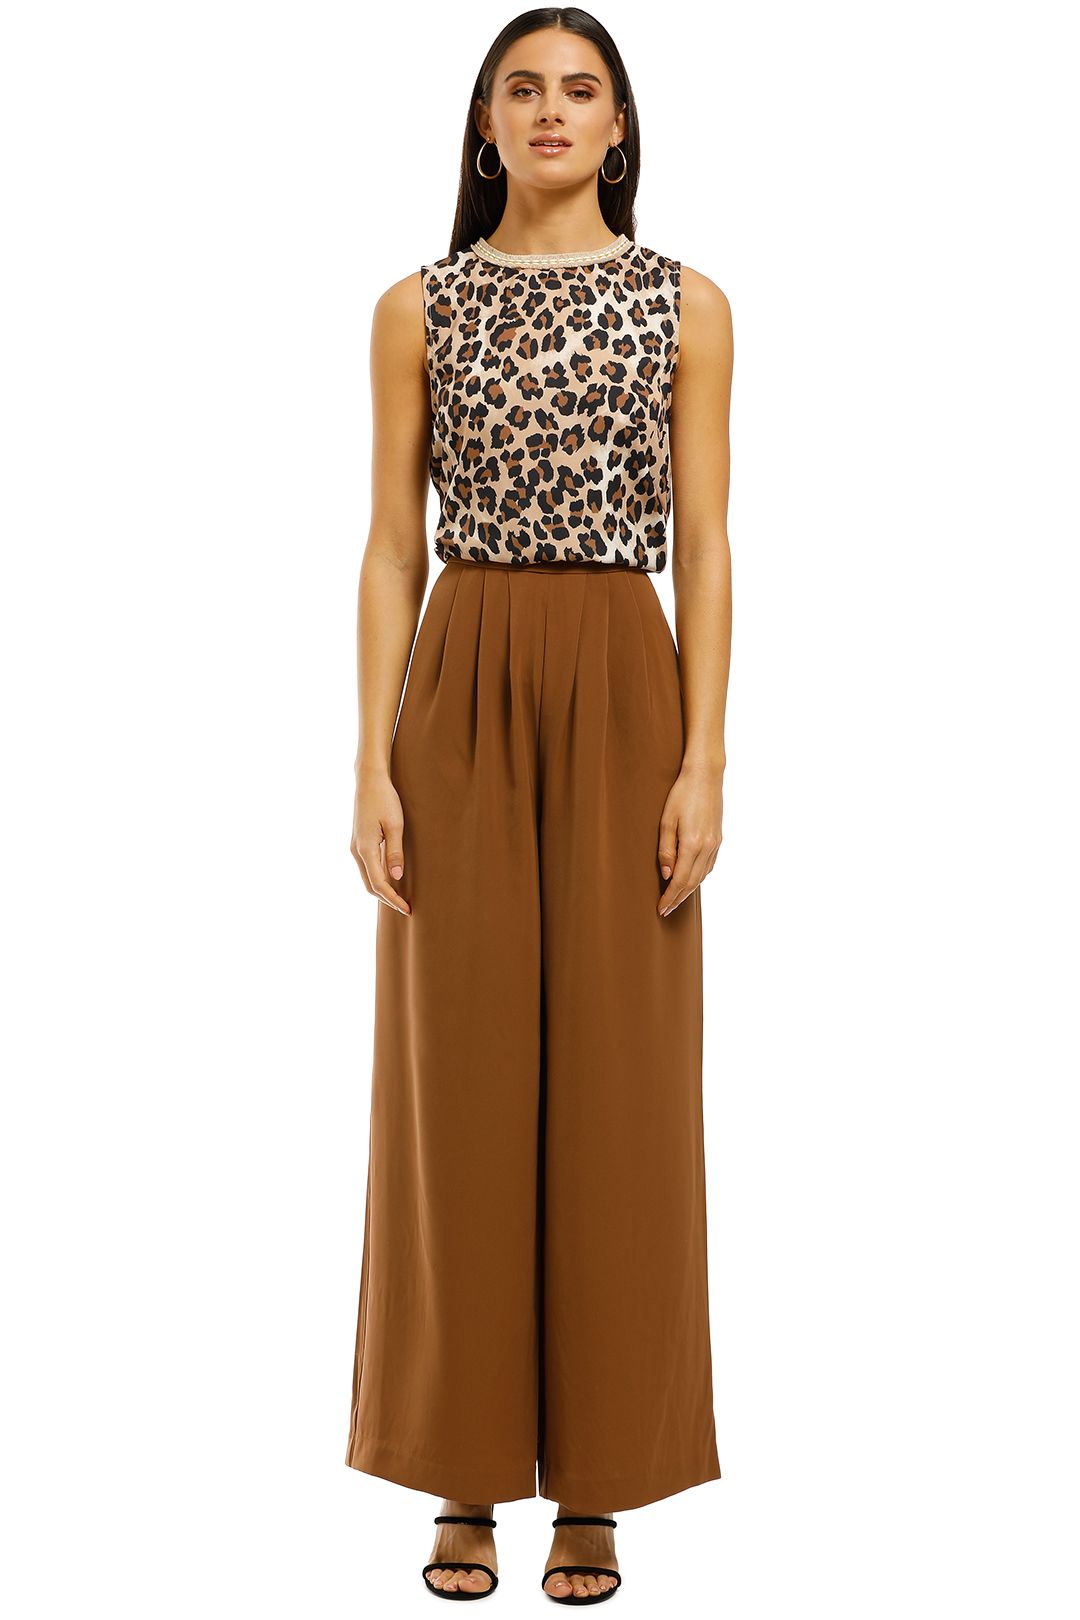 Cooper-by-Trelise-Cooper-Into-The-Wild-Top-Leopard-Front